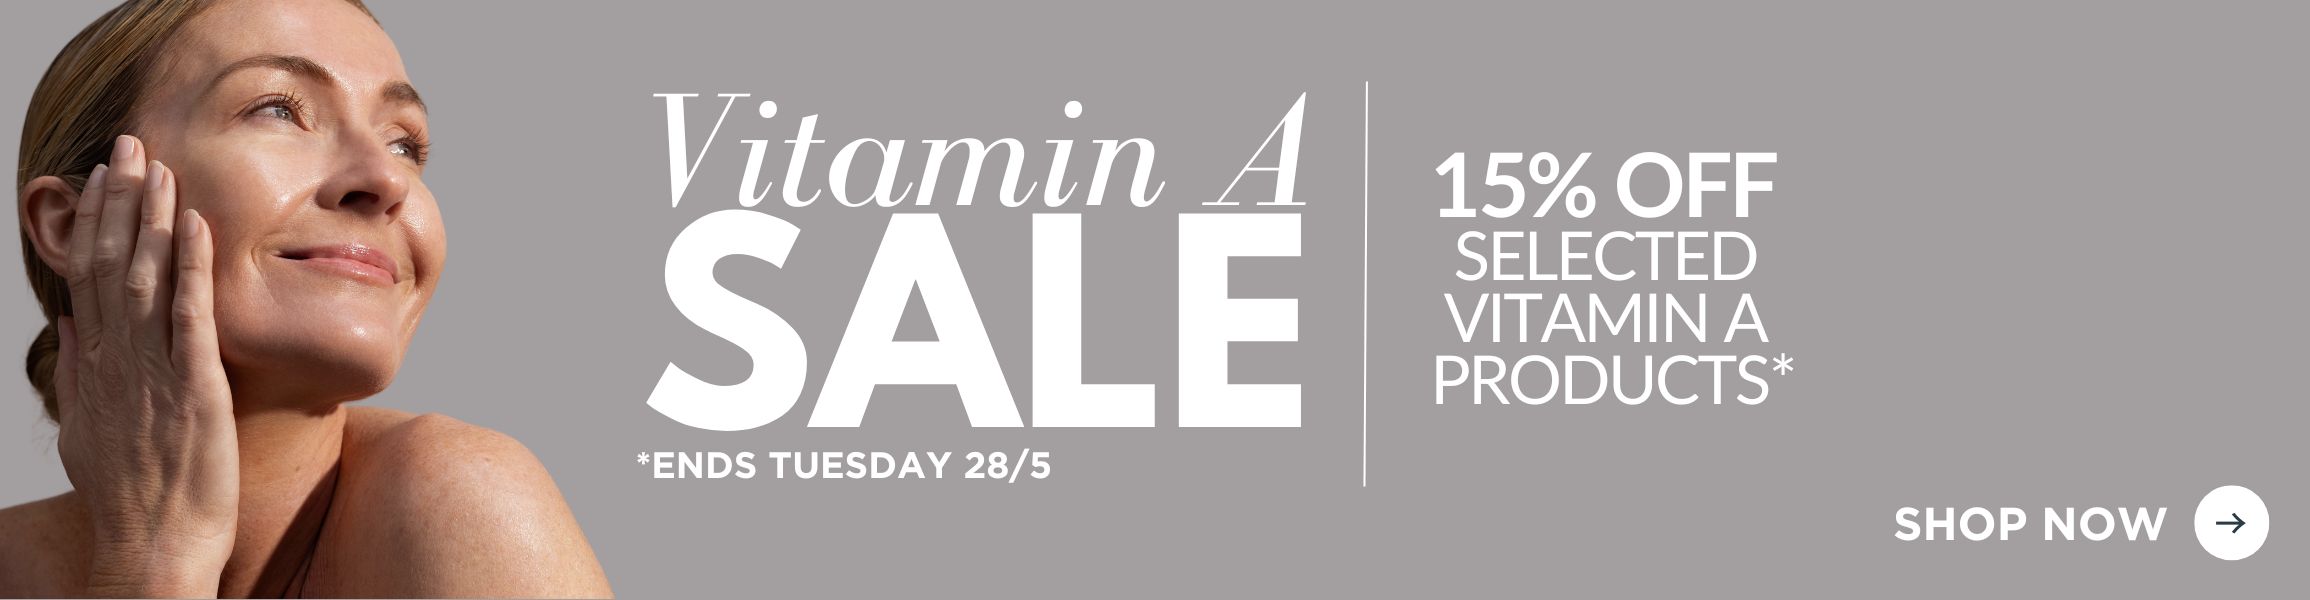 15% Off Selected Vitamin A Products